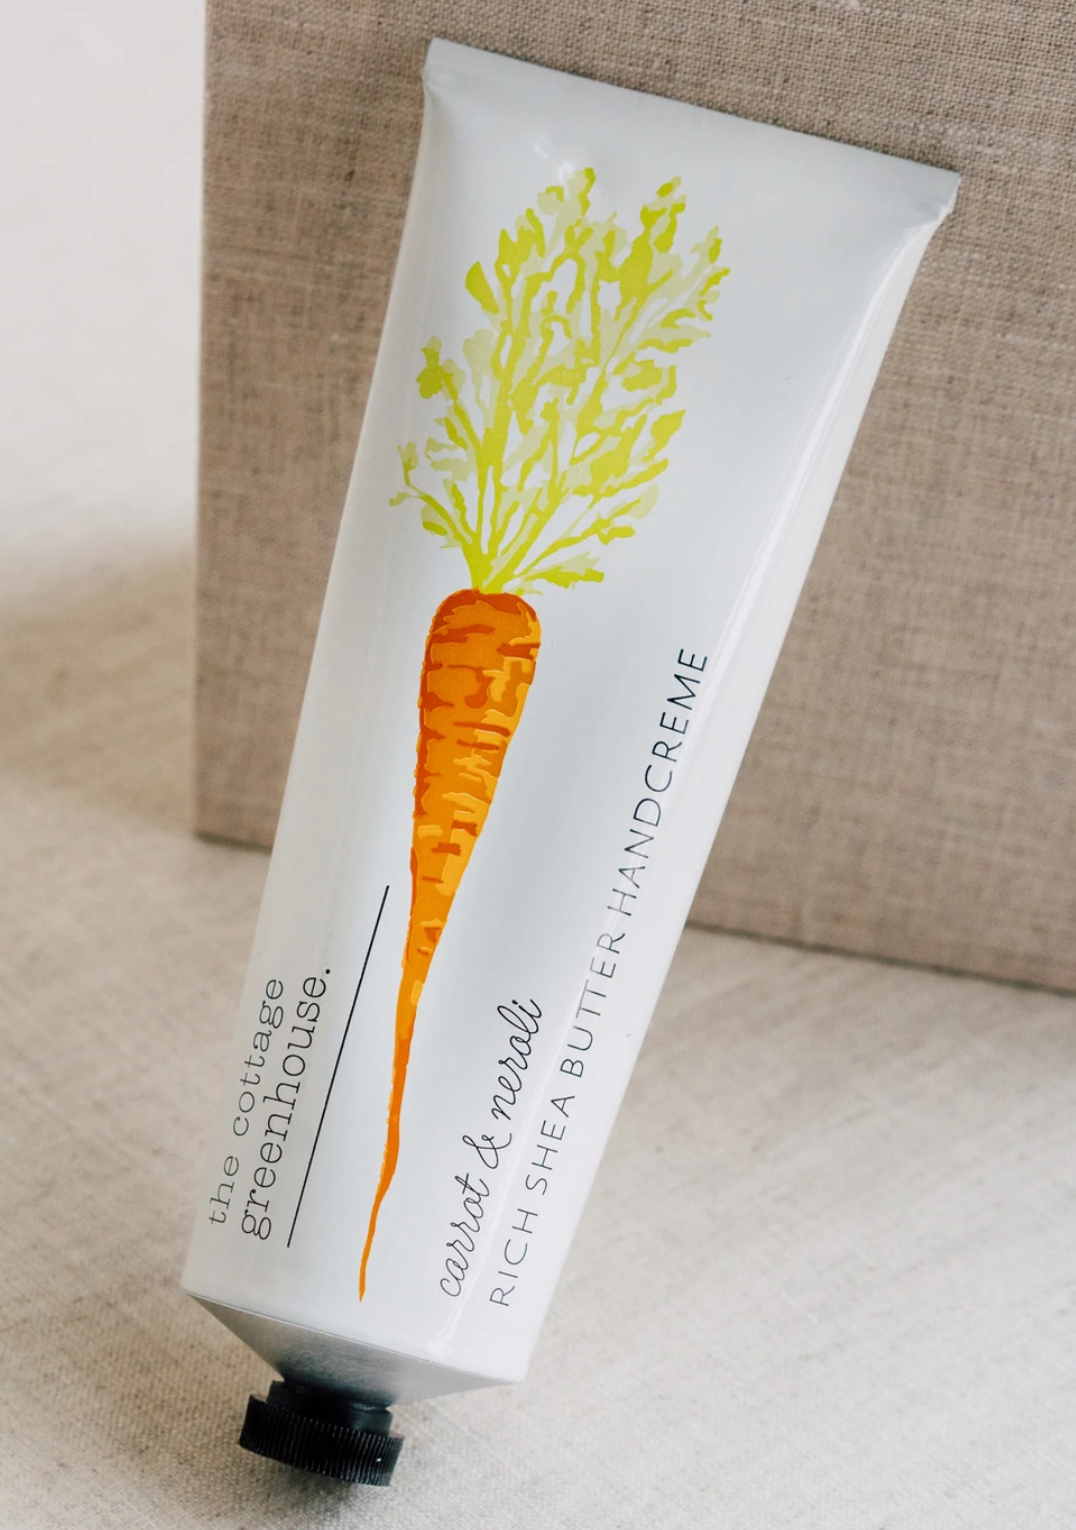 The Cottage Greenhouse Handcreme